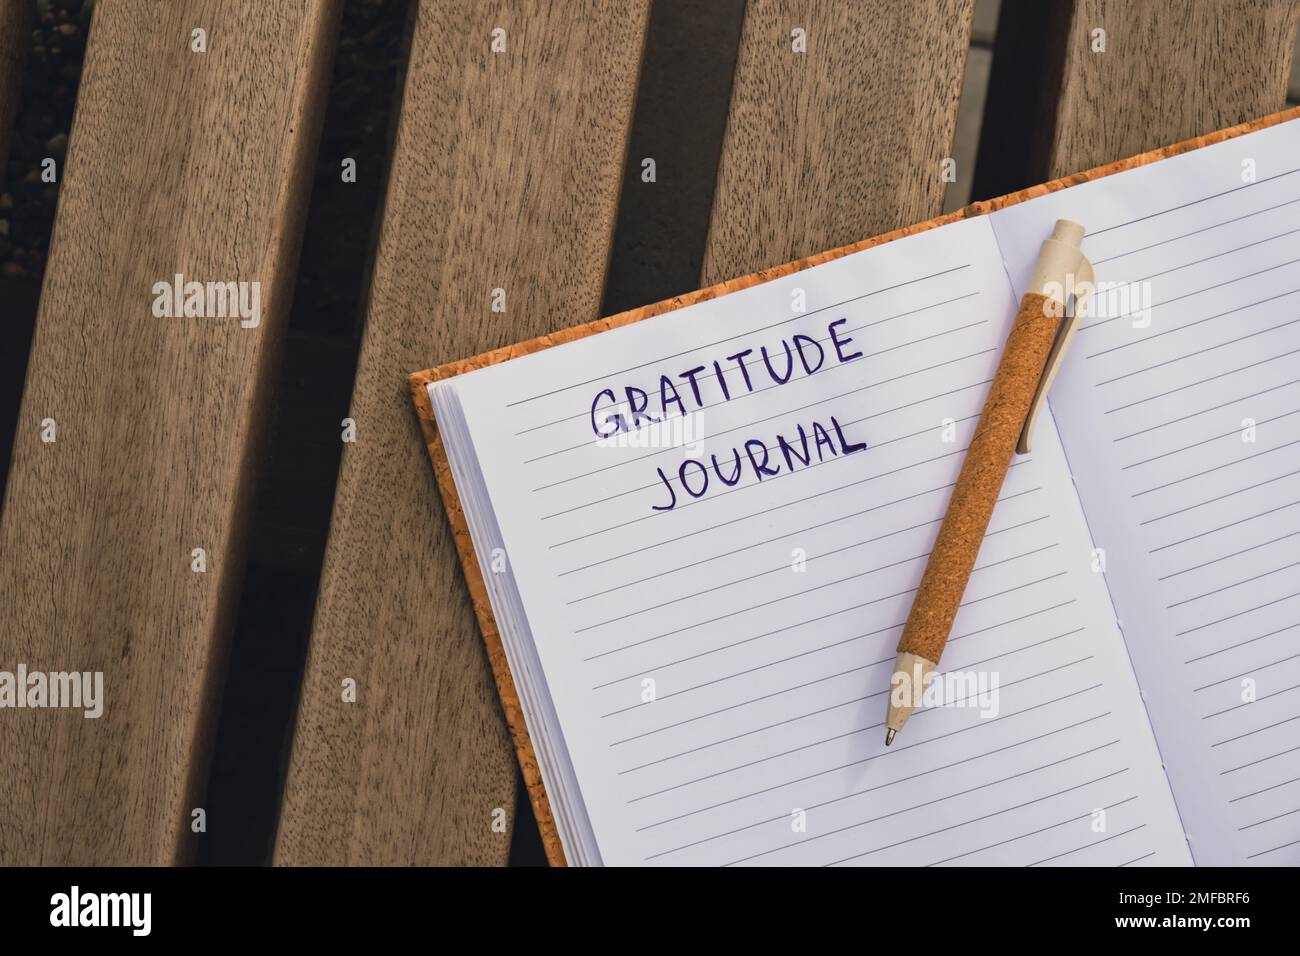 Writing Gratitude Journal on wooden bench. Today I am grateful for. Self discovery journal, self reflection creative writing, self growth personal development concept. Self care wellbeing spiritual health, being mindful, holistic health practices habits mindfulness  Stock Photo